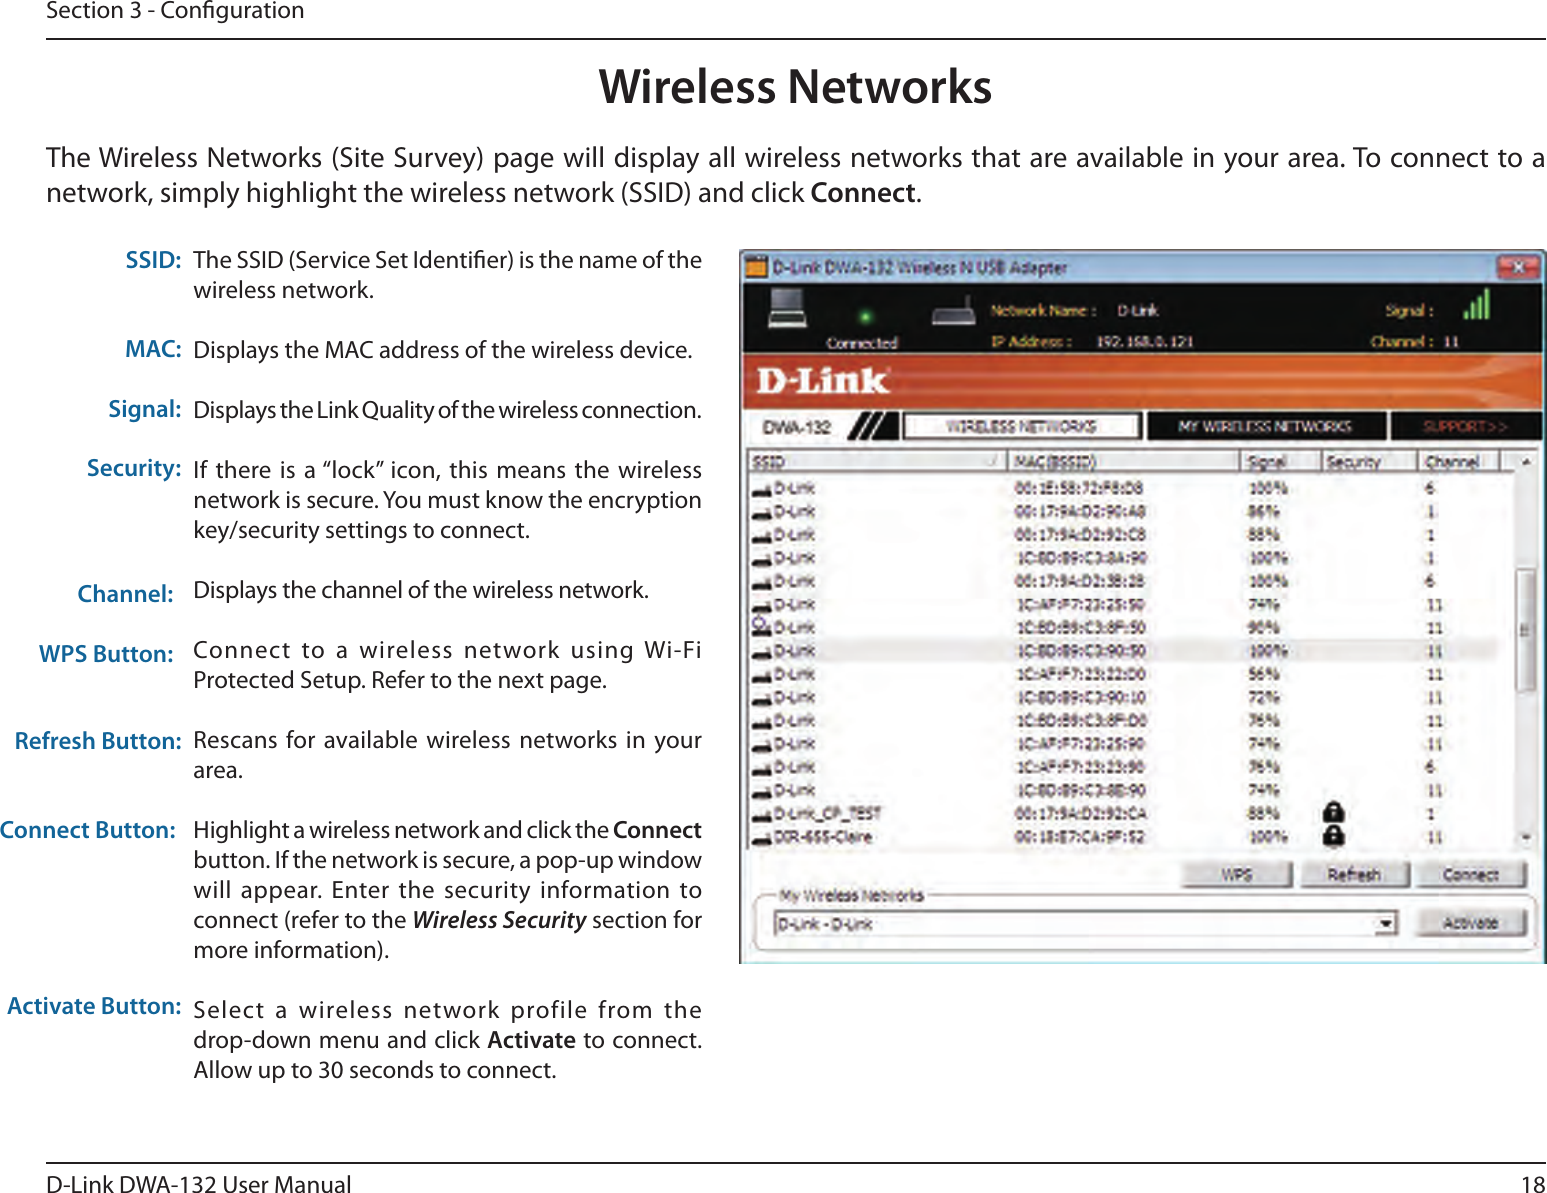 18D-Link DWA-132 User ManualSection 3 - CongurationWireless NetworksThe SSID (Service Set Identier) is the name of the wireless network.Displays the MAC address of the wireless device.Displays the Link Quality of the wireless connection. If there is  a “lock” icon, this means  the wireless network is secure. You must know the encryption key/security settings to connect.Displays the channel of the wireless network.Connect  to a  wireless  network  using Wi-Fi Protected Setup. Refer to the next page.Rescans for available wireless networks in  your area.Highlight a wireless network and click the Connect button. If the network is secure, a pop-up window will appear.  Enter the security information to connect (refer to the Wireless Security section for more information).Select  a  wireless  network  profile  from the  drop-down menu and click Activate to connect. Allow up to 30 seconds to connect.MAC:SSID:Channel:Signal:Security:Refresh Button:Connect Button:Activate Button:The Wireless Networks (Site Survey) page will display all wireless networks that are available in your area. To connect to a network, simply highlight the wireless network (SSID) and click Connect.WPS Button: